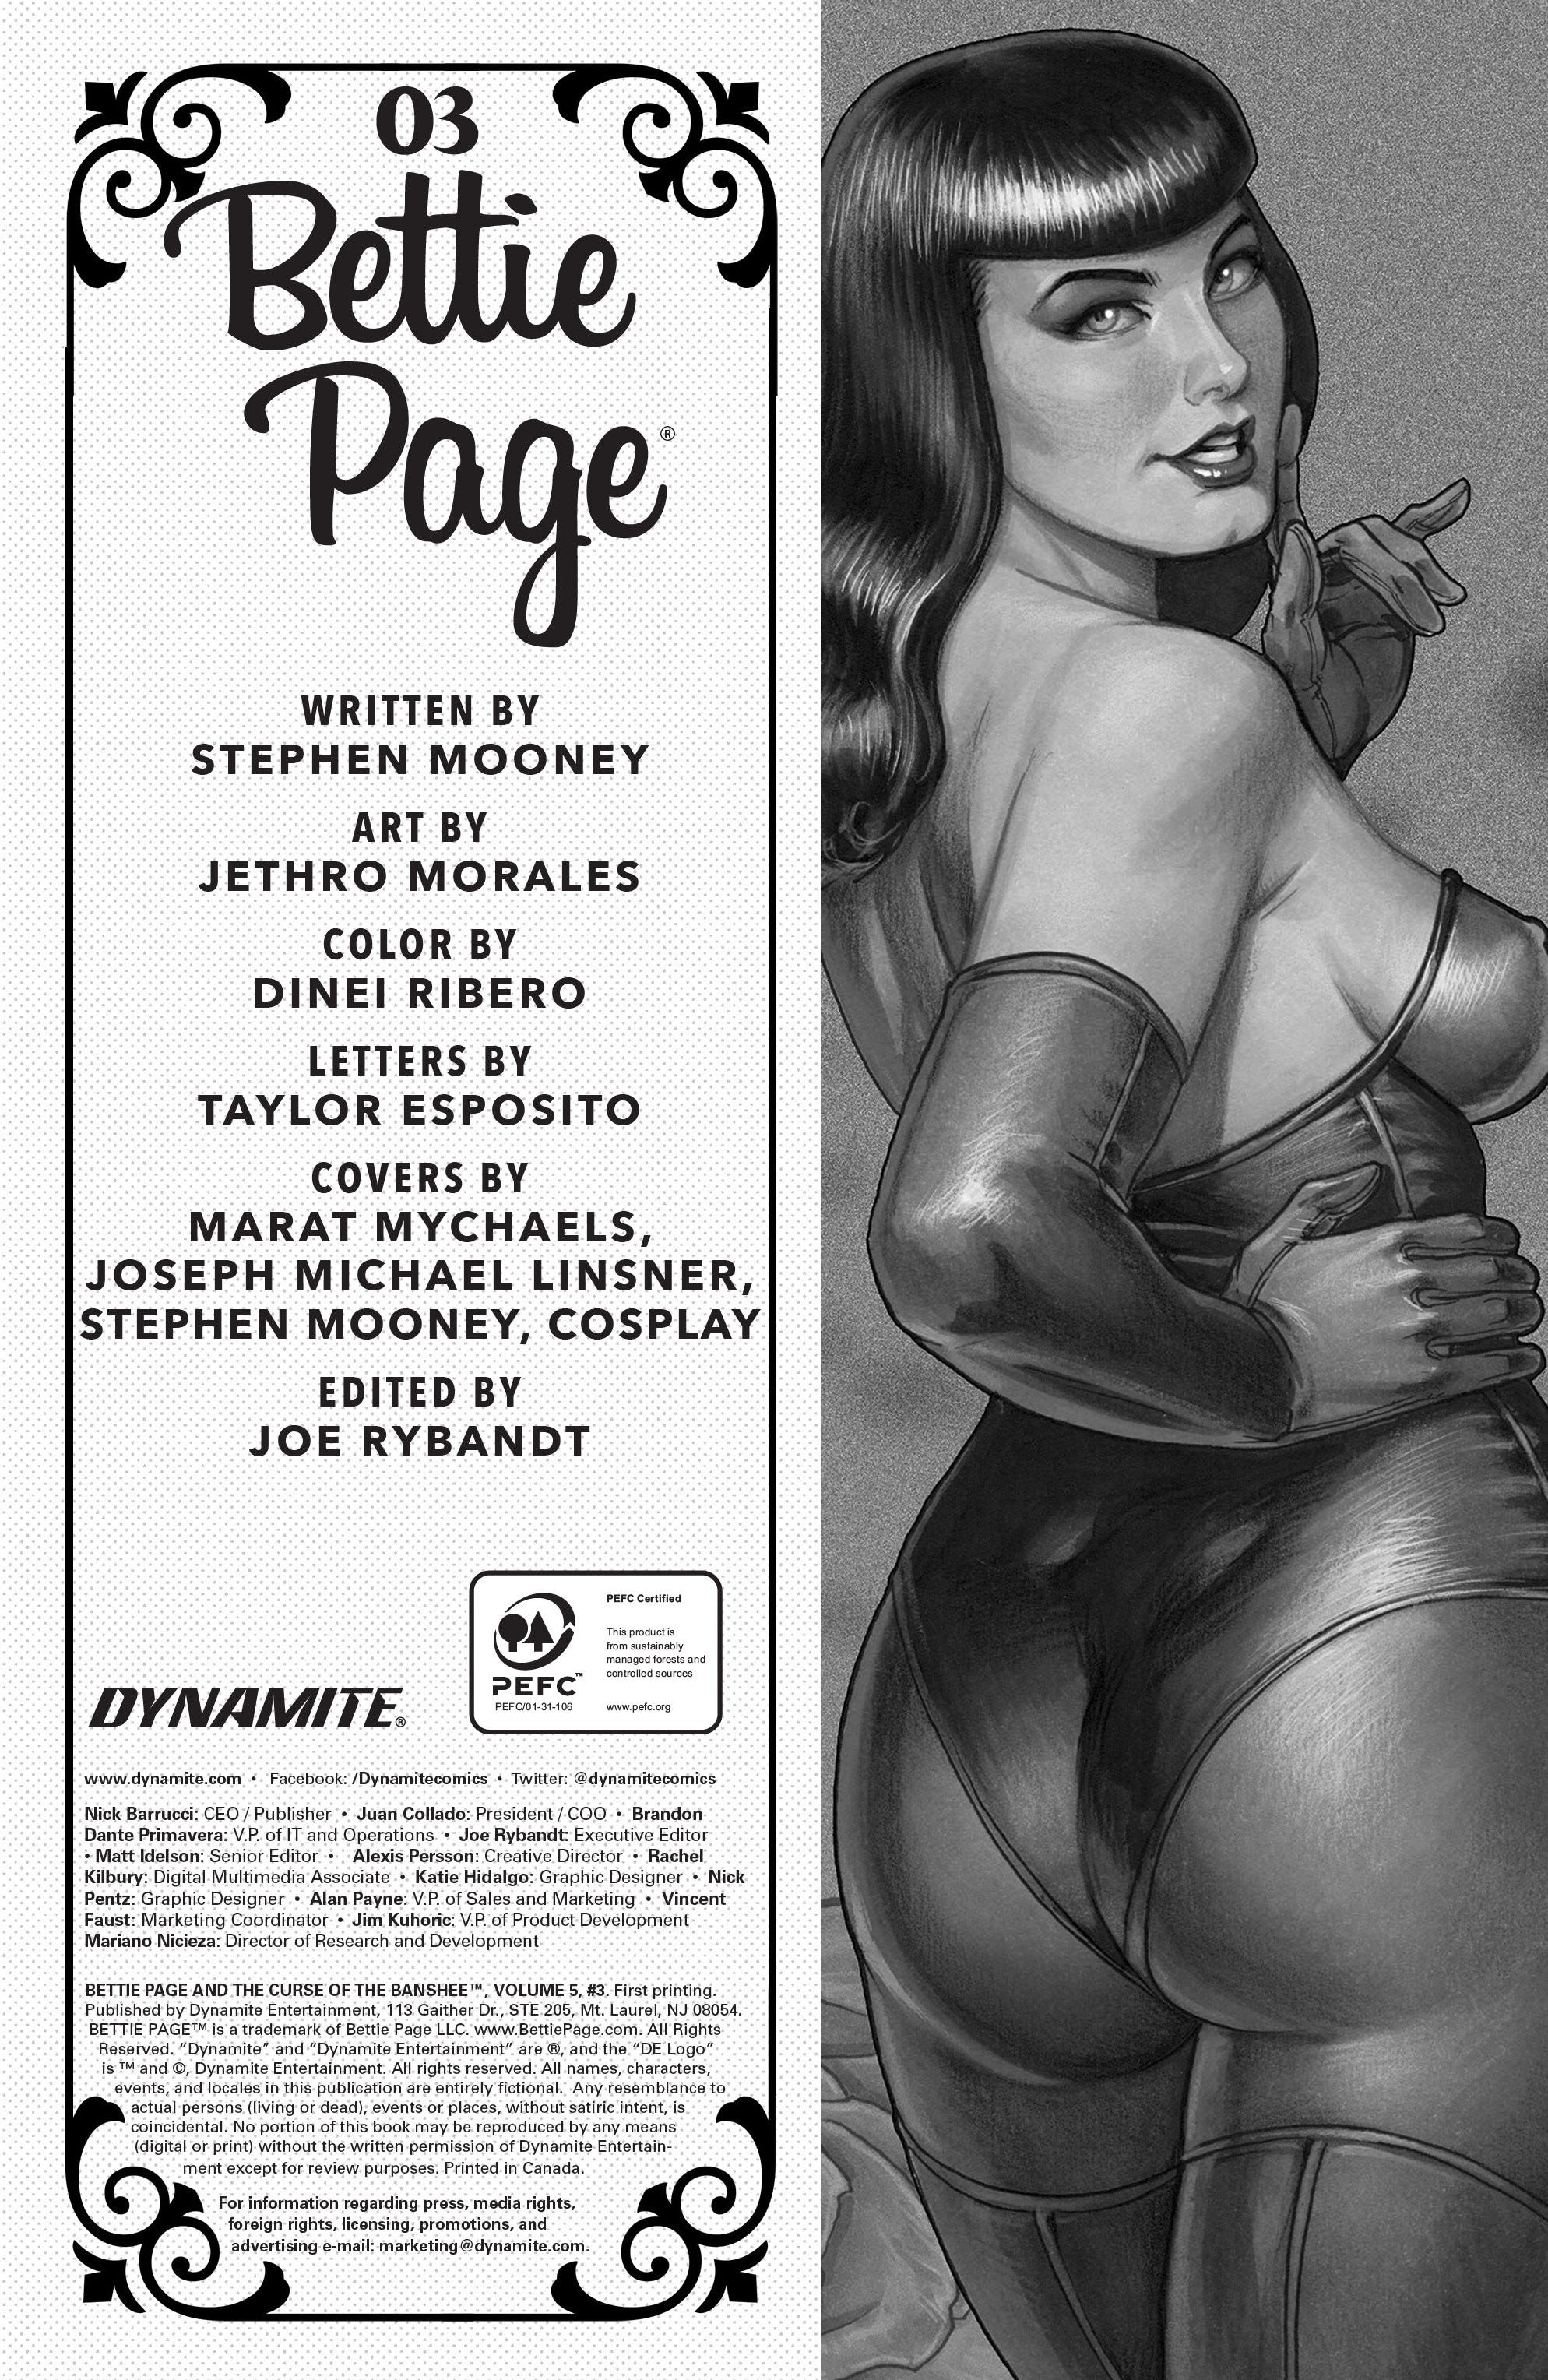 Read online Bettie Page & The Curse of the Banshee comic -  Issue #3 - 6